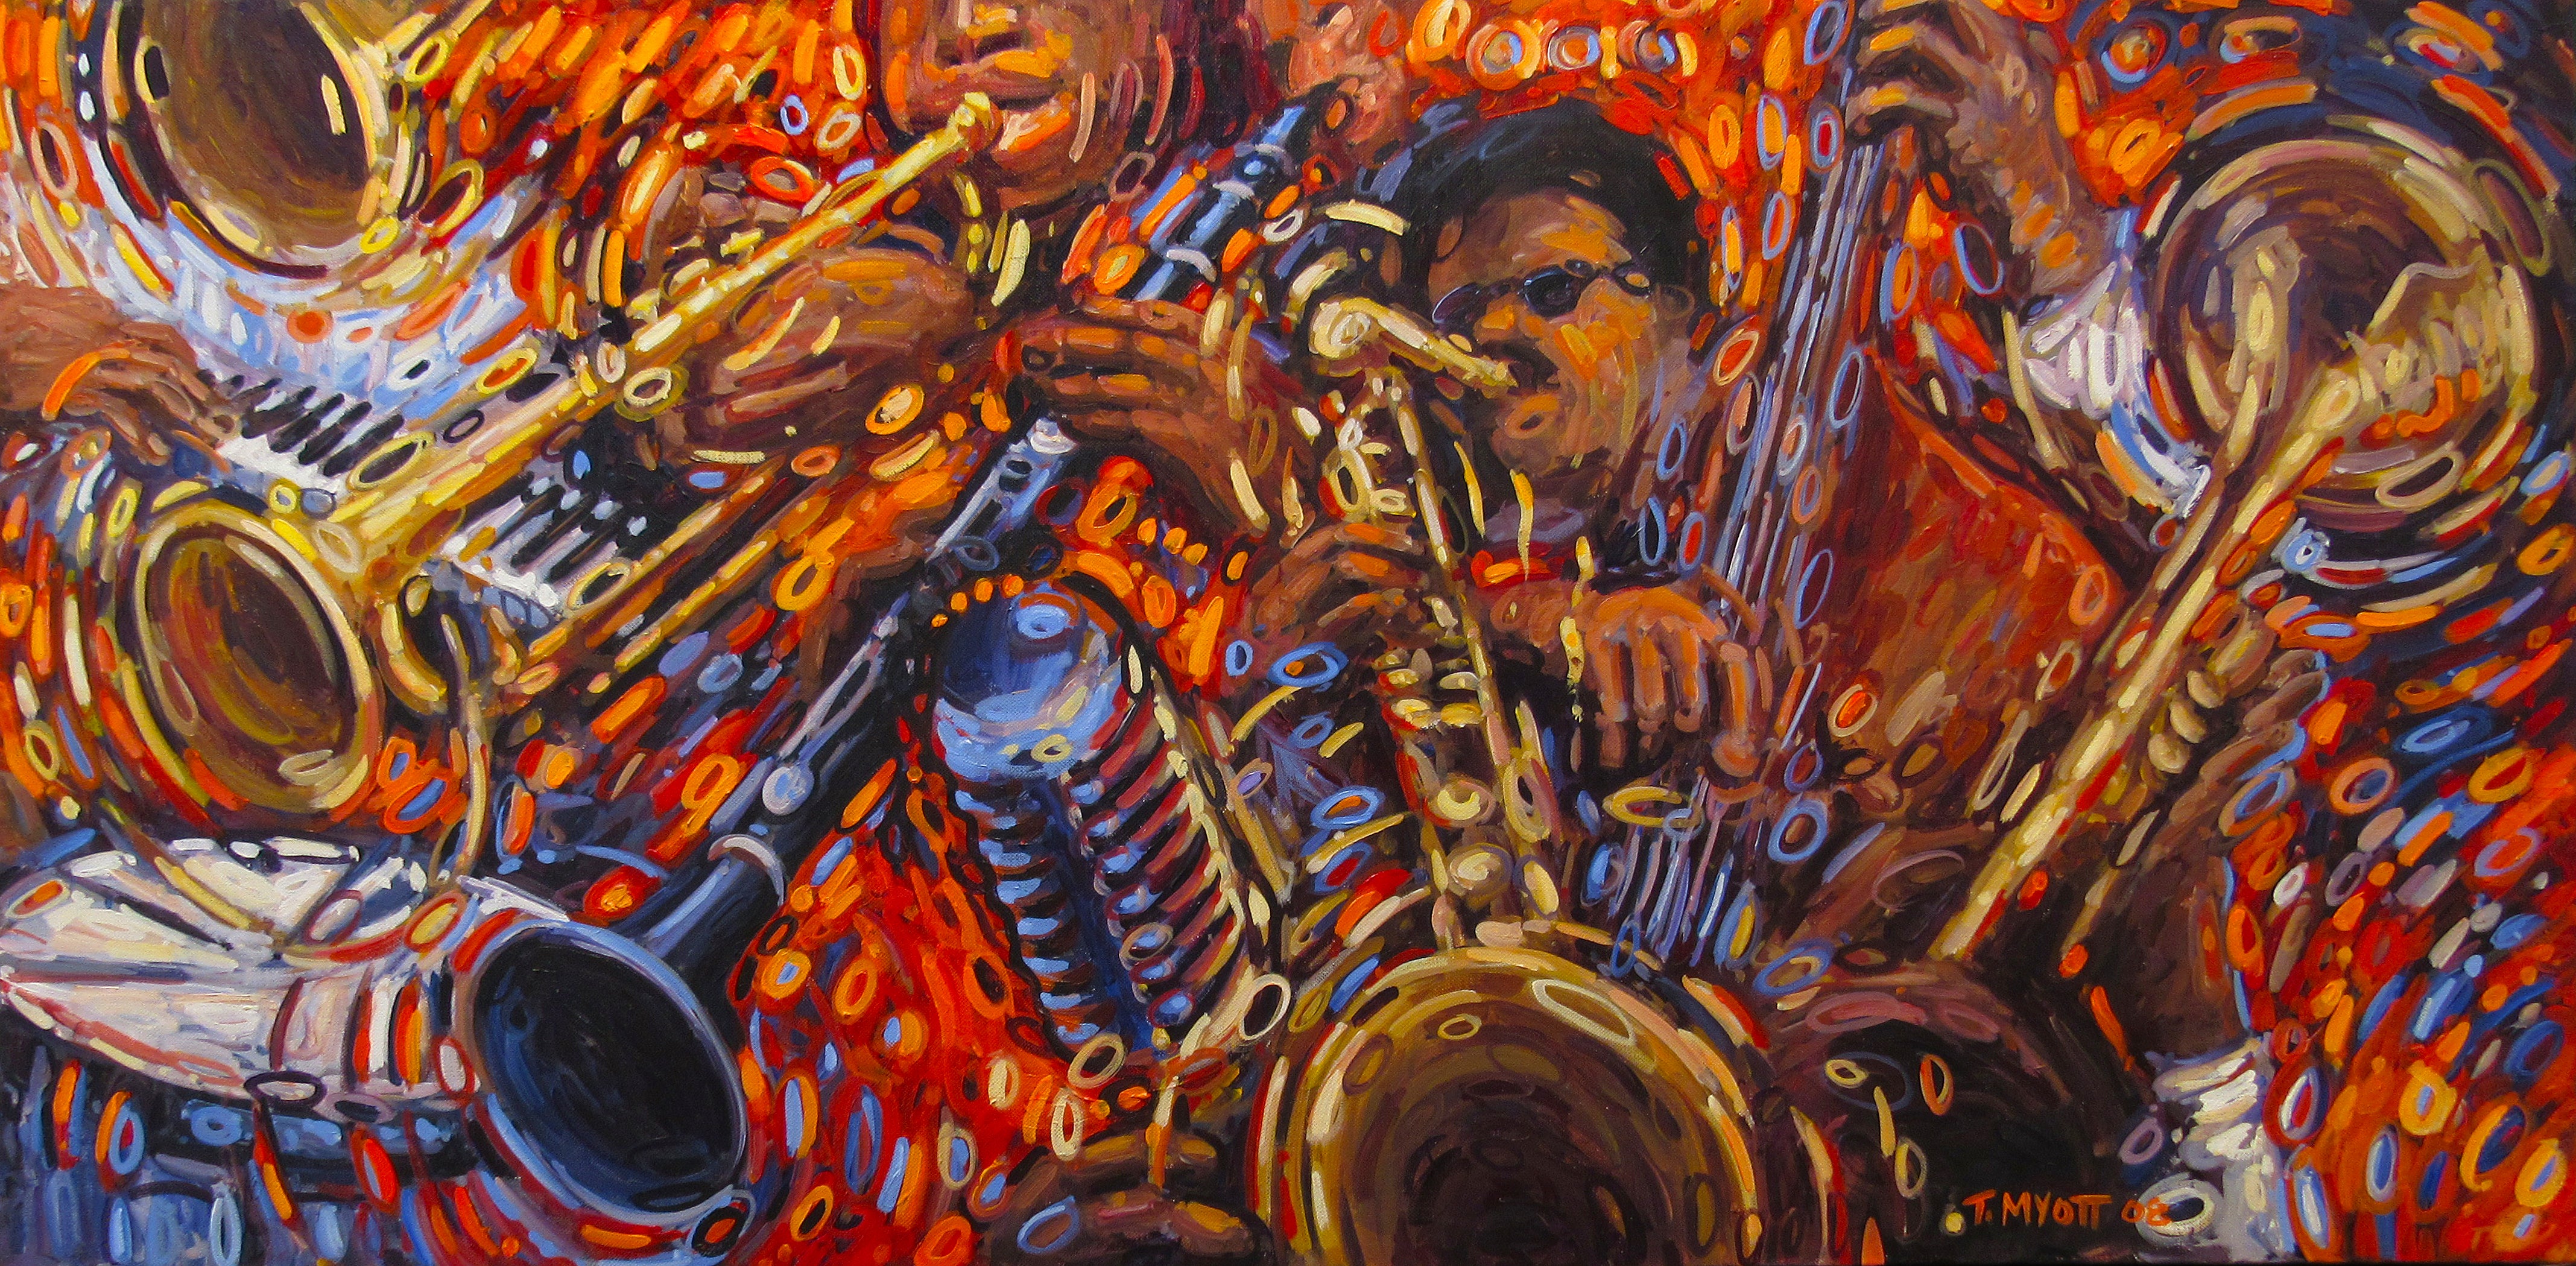 A dynamic painting by Tom Myott depicting a vibrant jazz scene. The artwork is alive with swirling patterns and warm colors that evoke the rhythm and movement of music. A saxophone player is central in the composition, surrounded by a cascade of brass instruments, all melting into a visual symphony of reds, oranges, blues, and yellows. The musician's expression is focused and intense, capturing the soulful essence of a live jazz performance.